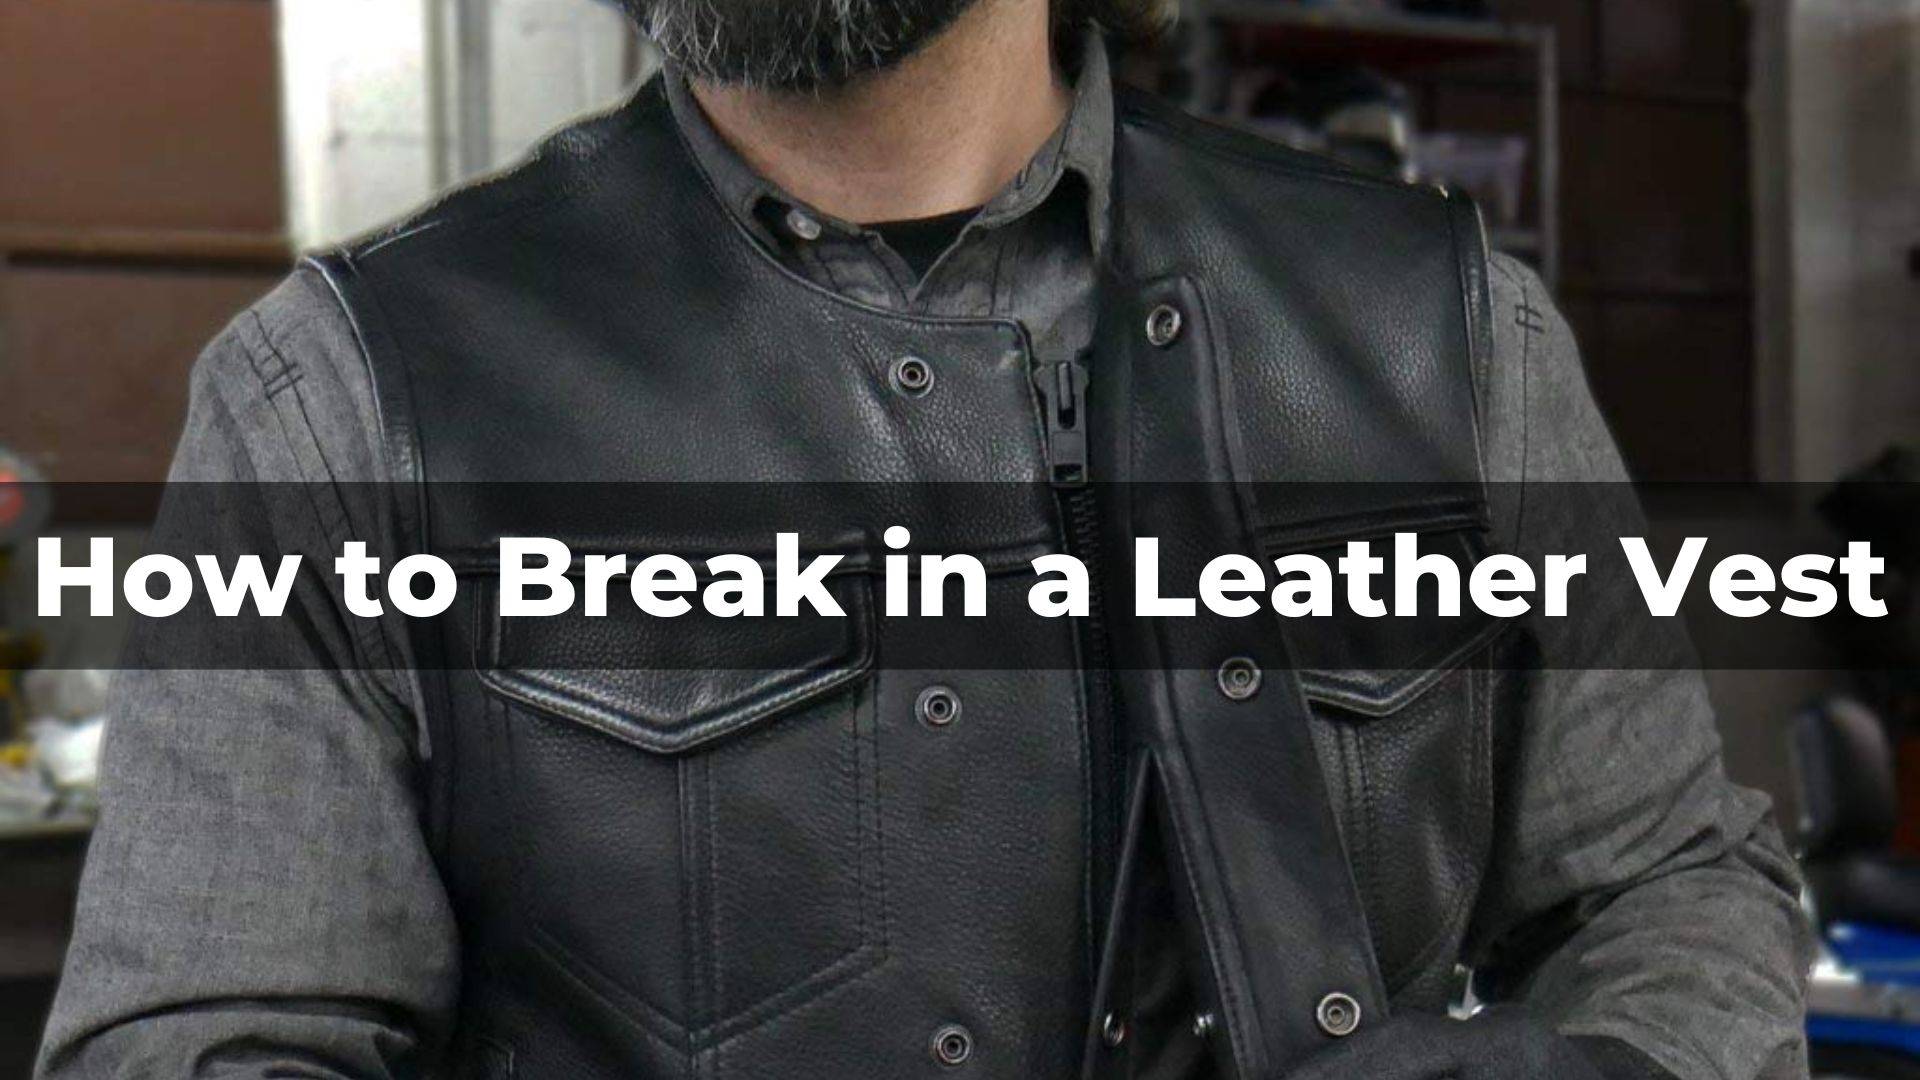 How to Break in a Leather Vest